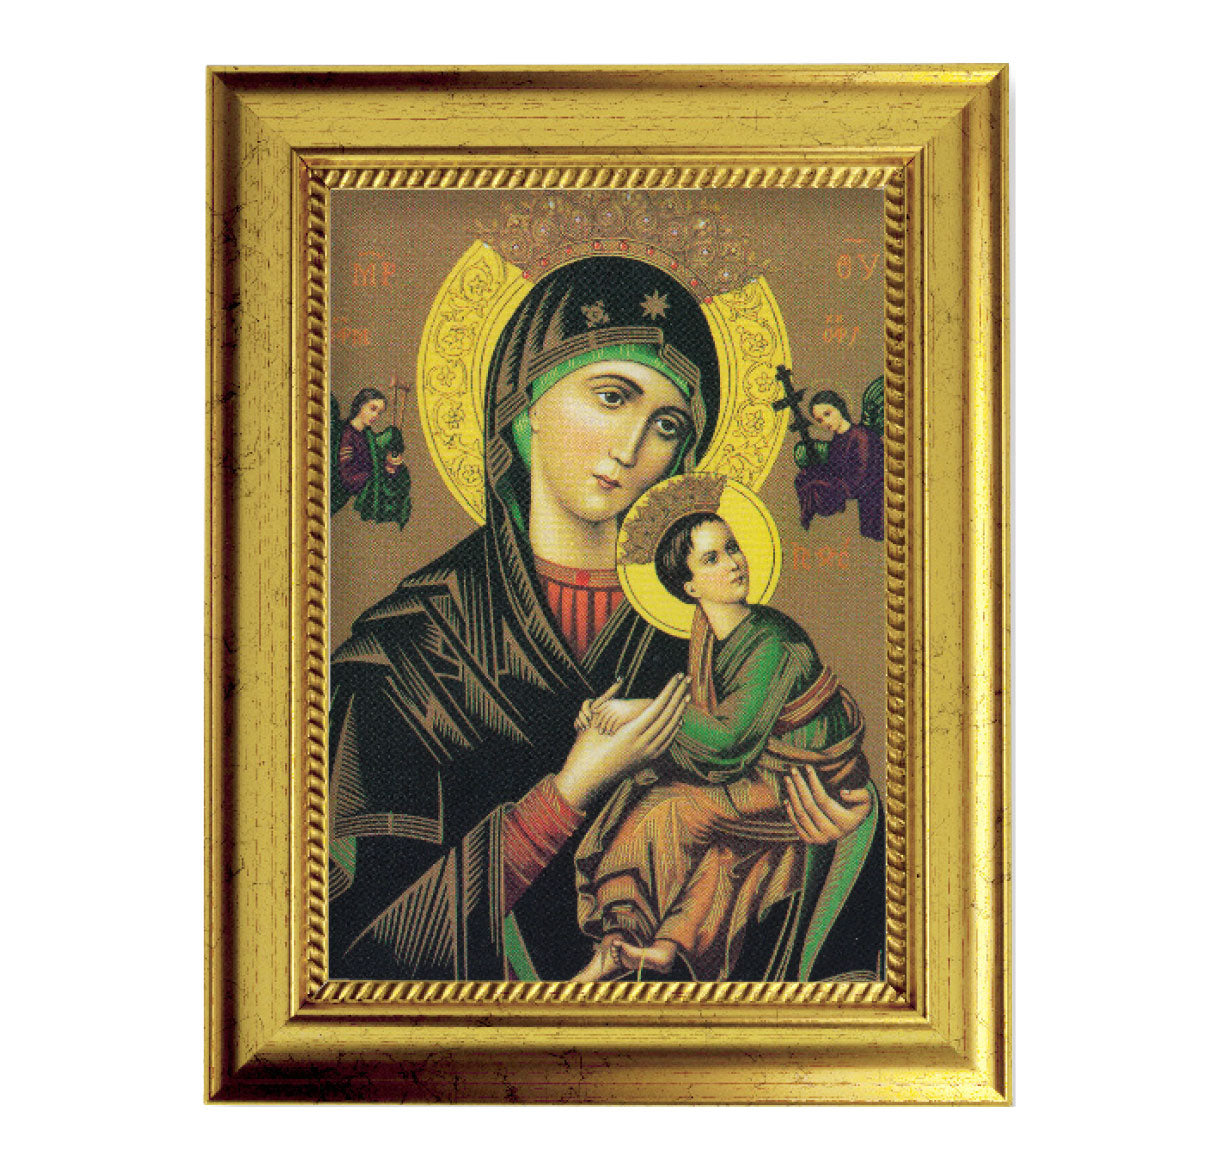 Our Lady of Perpetual Help Gold-Leaf Framed Art